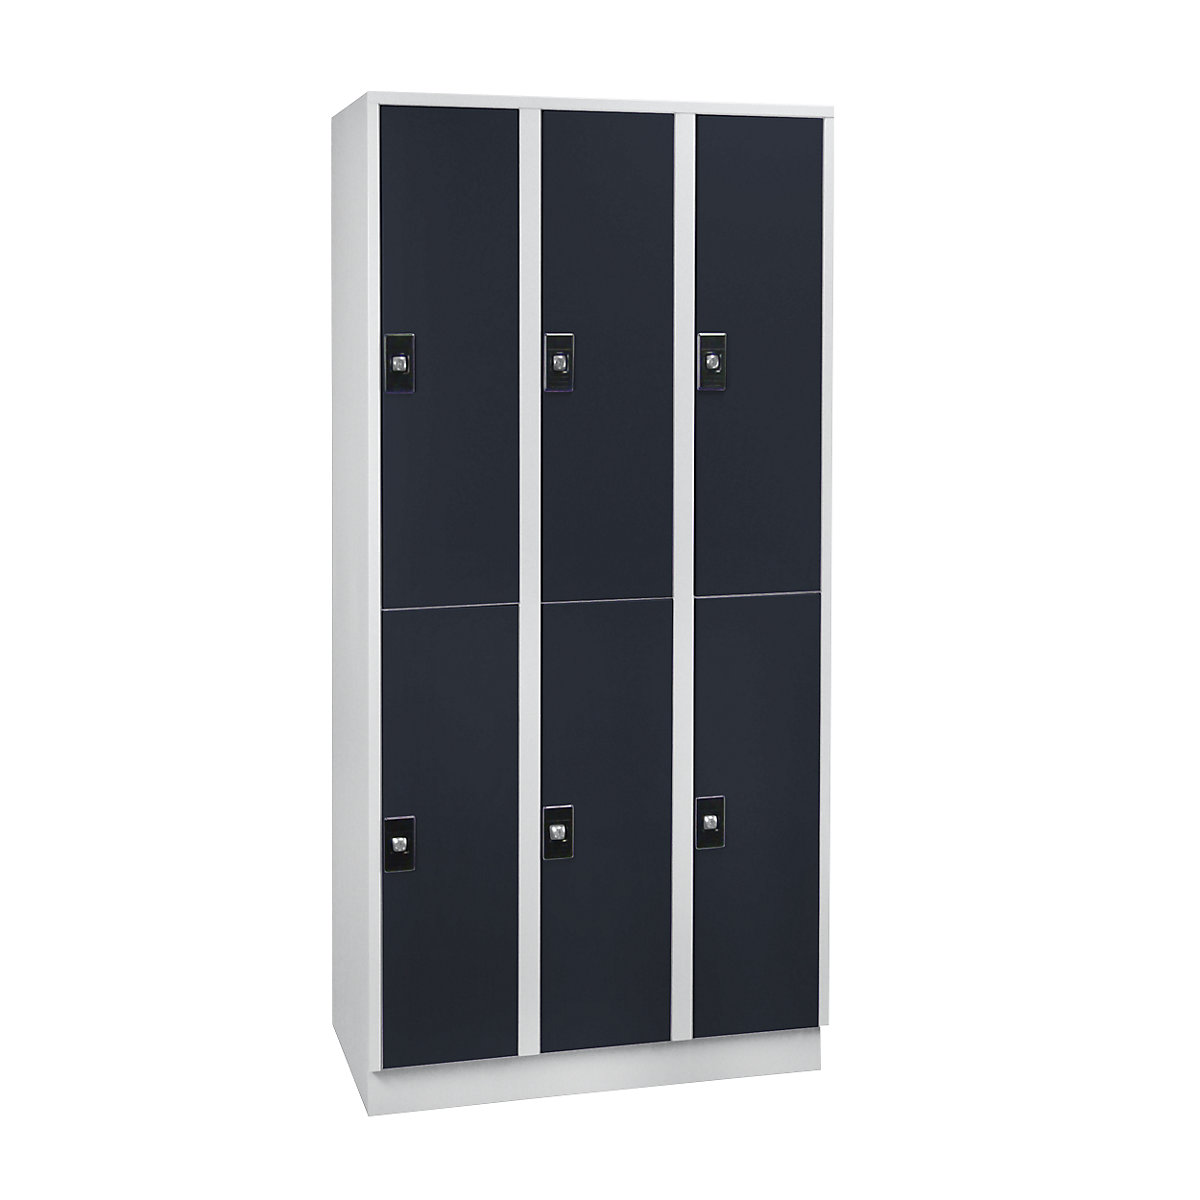 Cloakroom locker – Wolf, 6 compartments, width 900 mm, light grey / anthracite grey-7